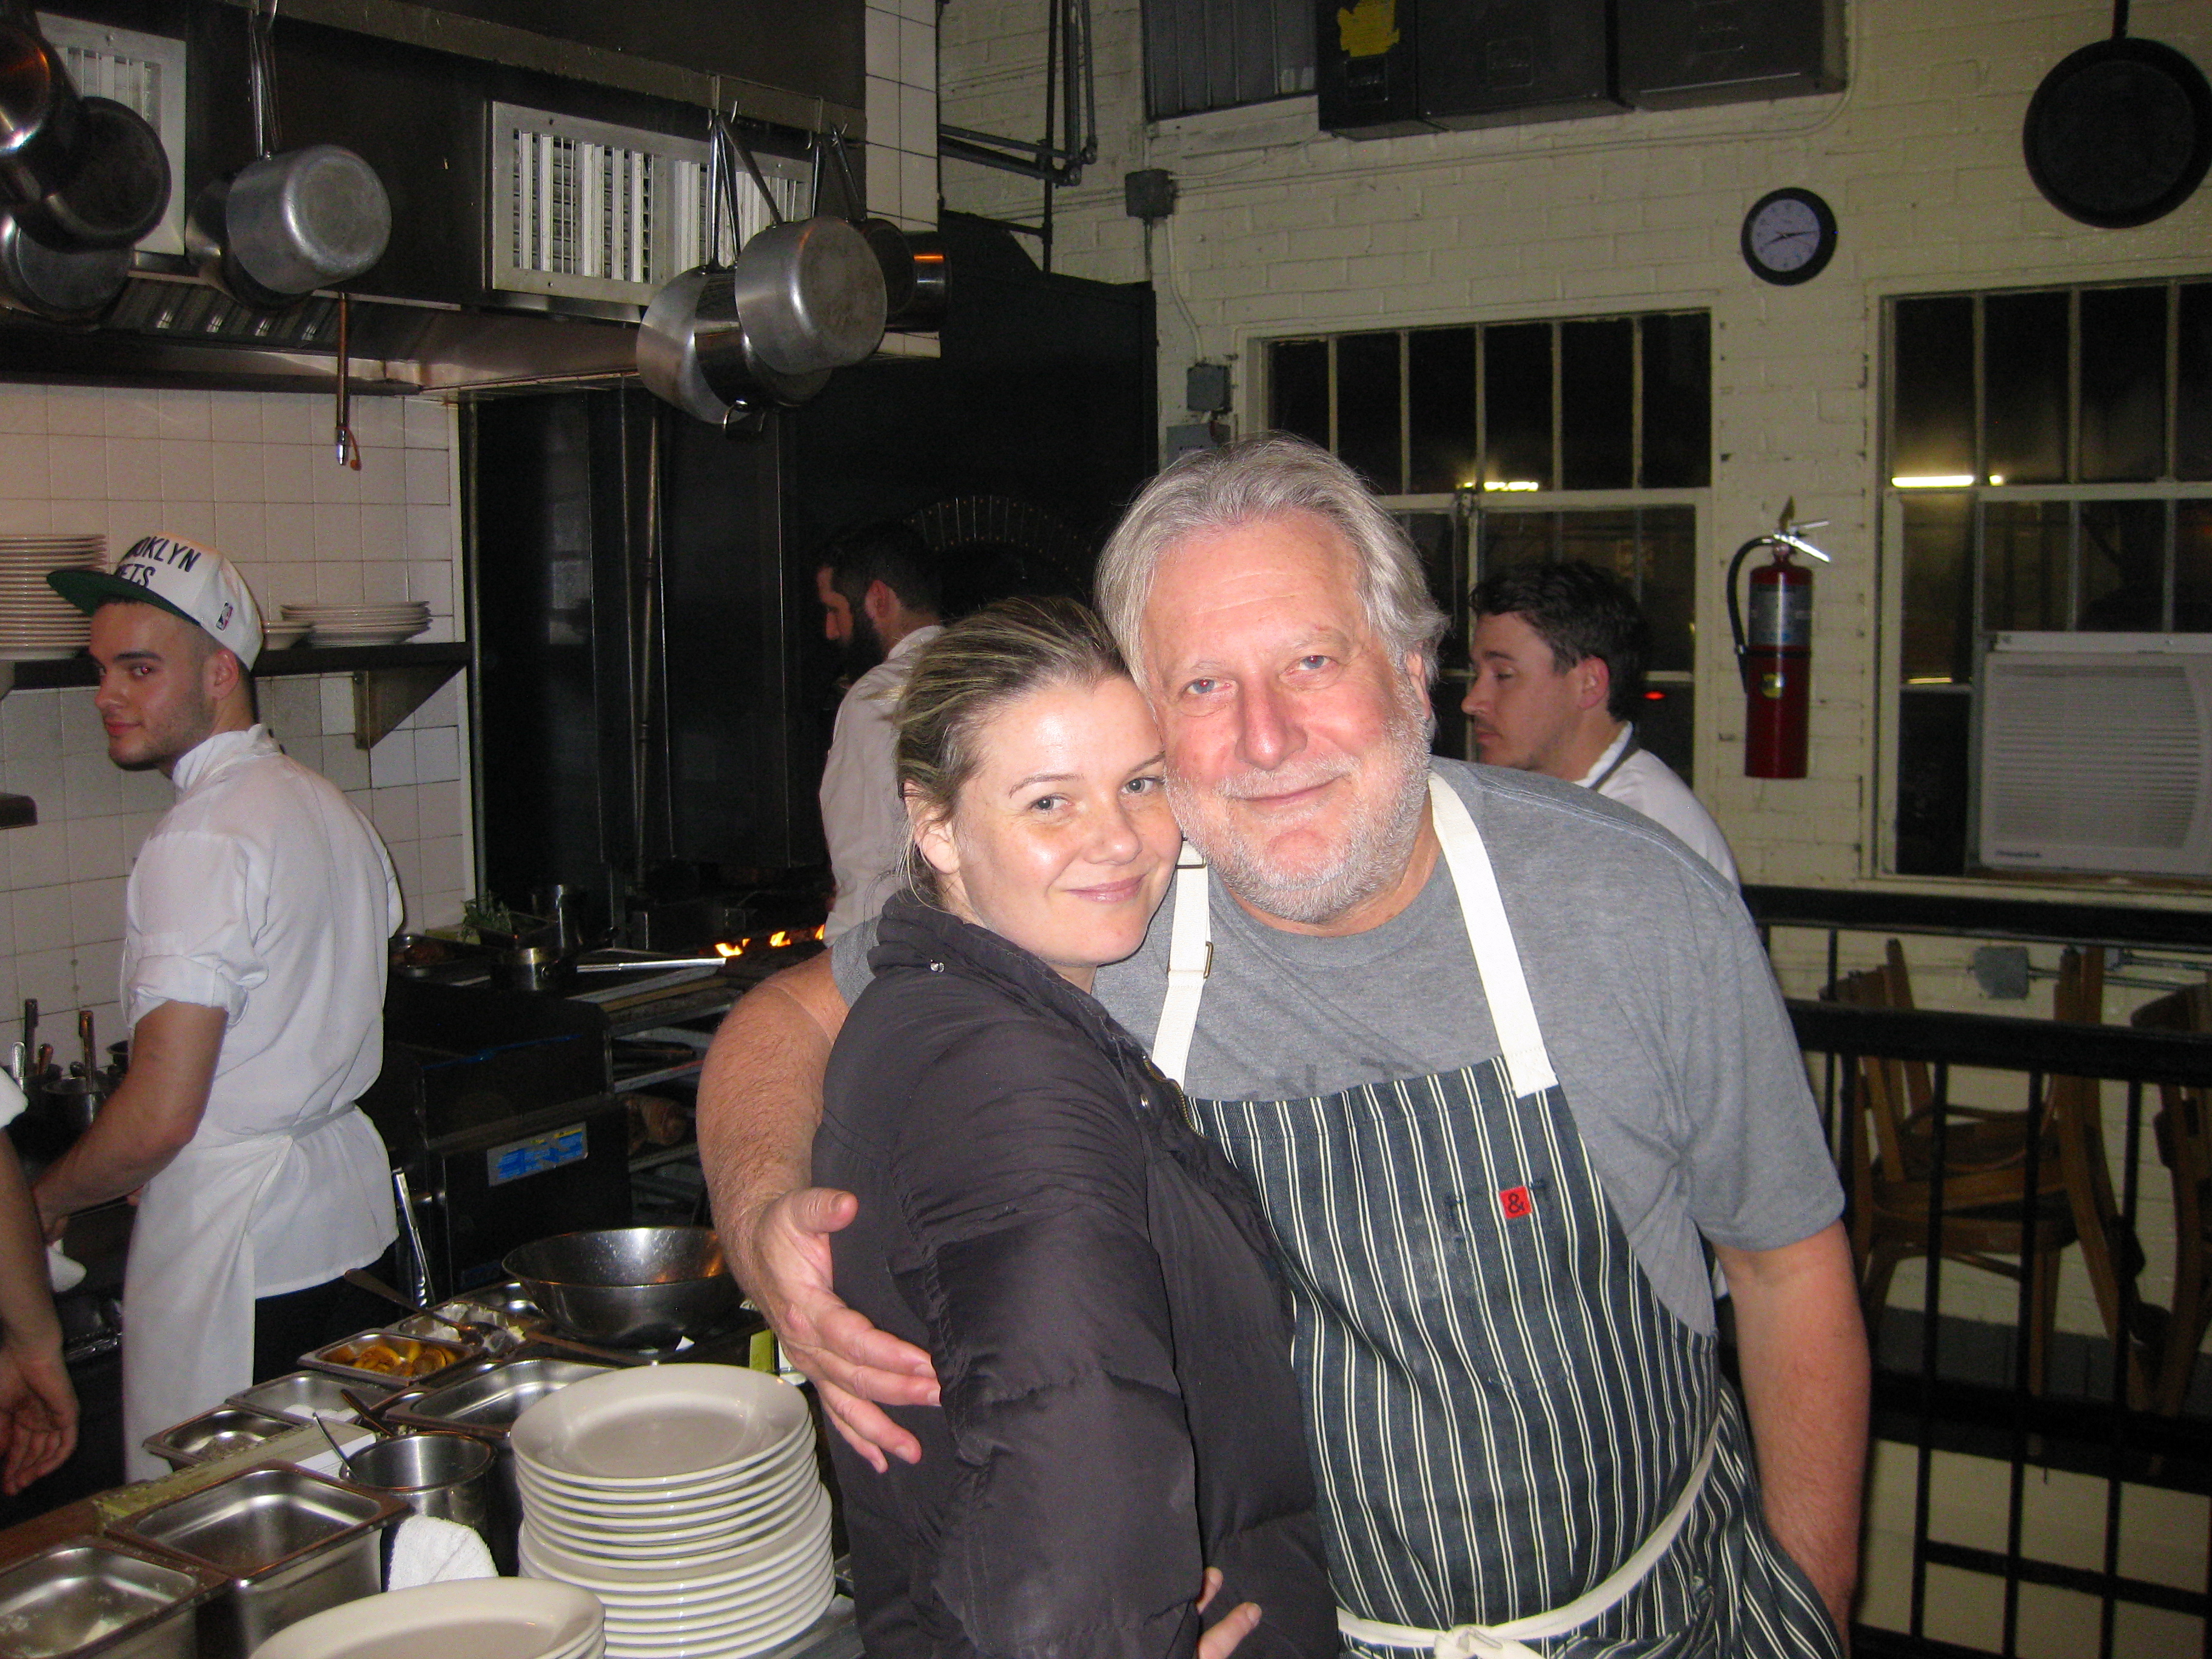 Reunited:  Onetime GM Anna Weinberg and Jonathan Waxman in the Barbuto kitchen.